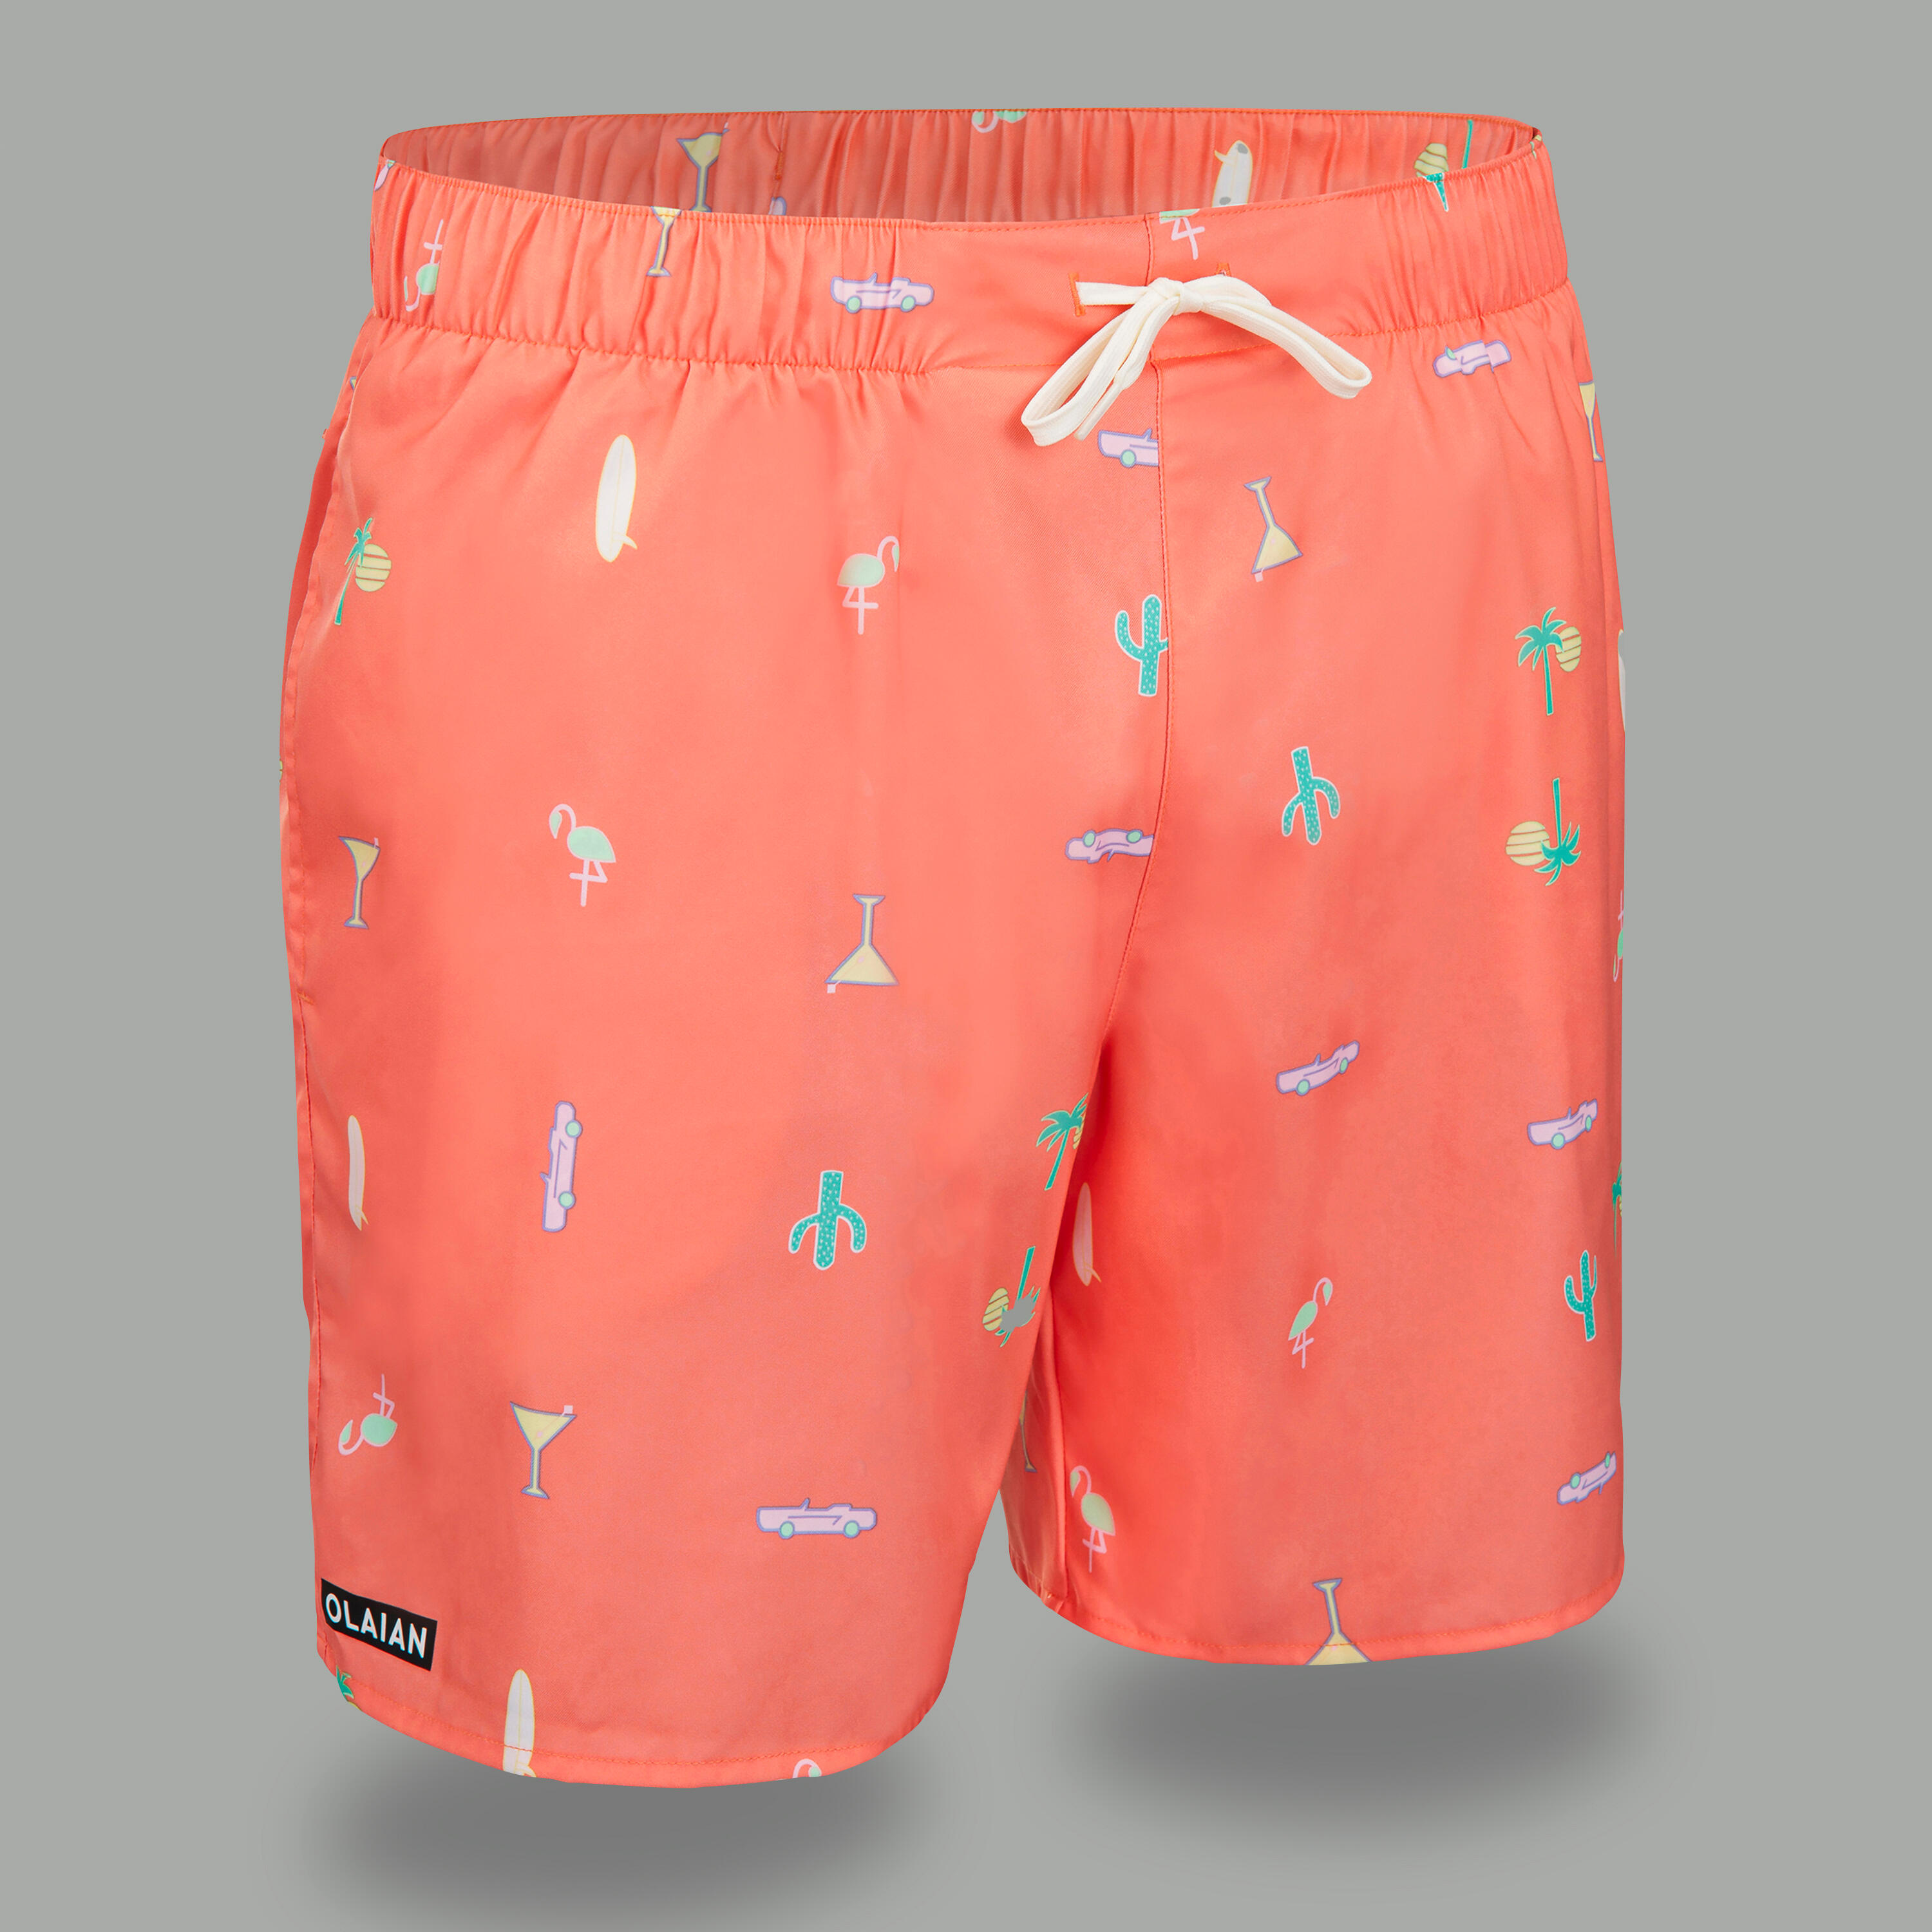 Men's Surfing Boardshorts - BS 100 Cosmic Coral - Coral red